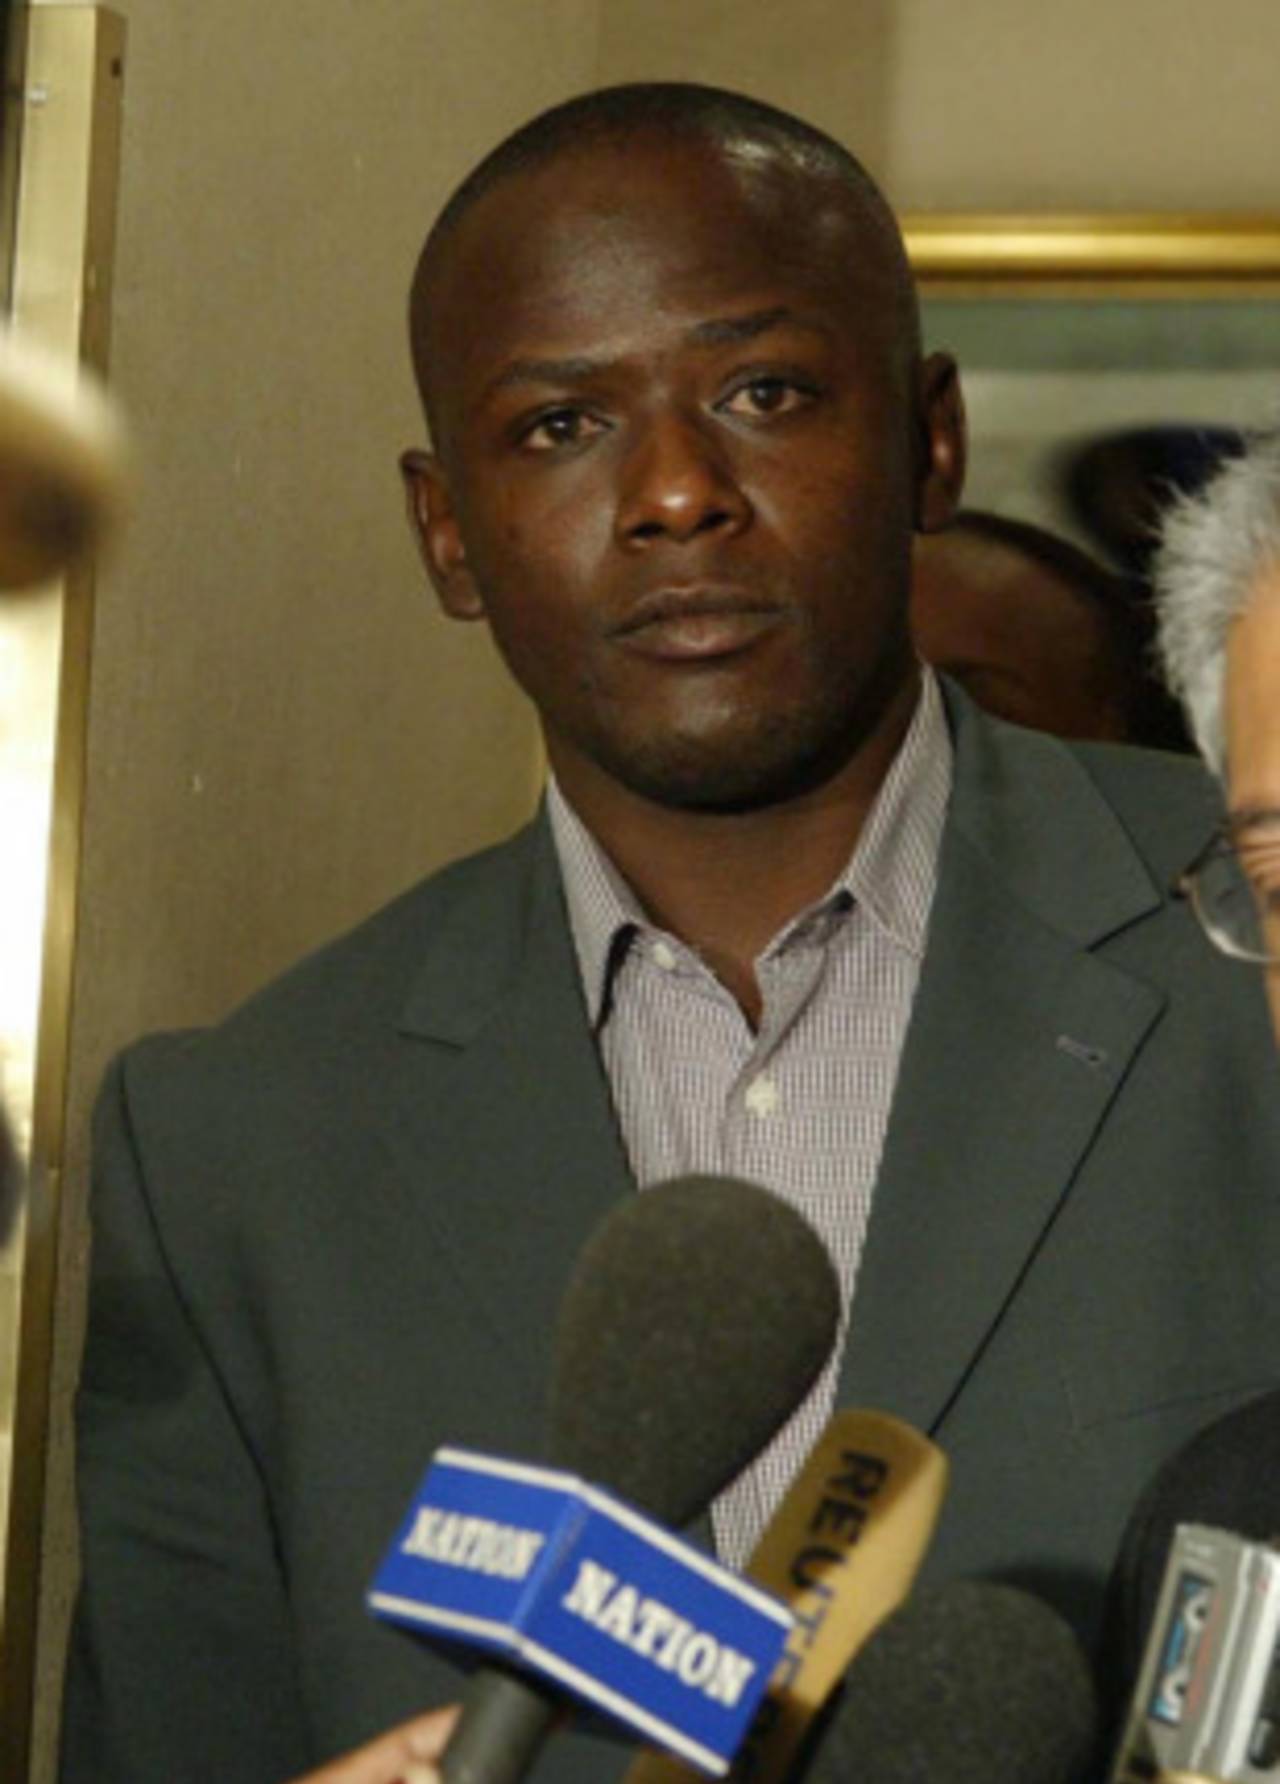 Maurice Odumbe and his lawyer in court, June 19, 2004